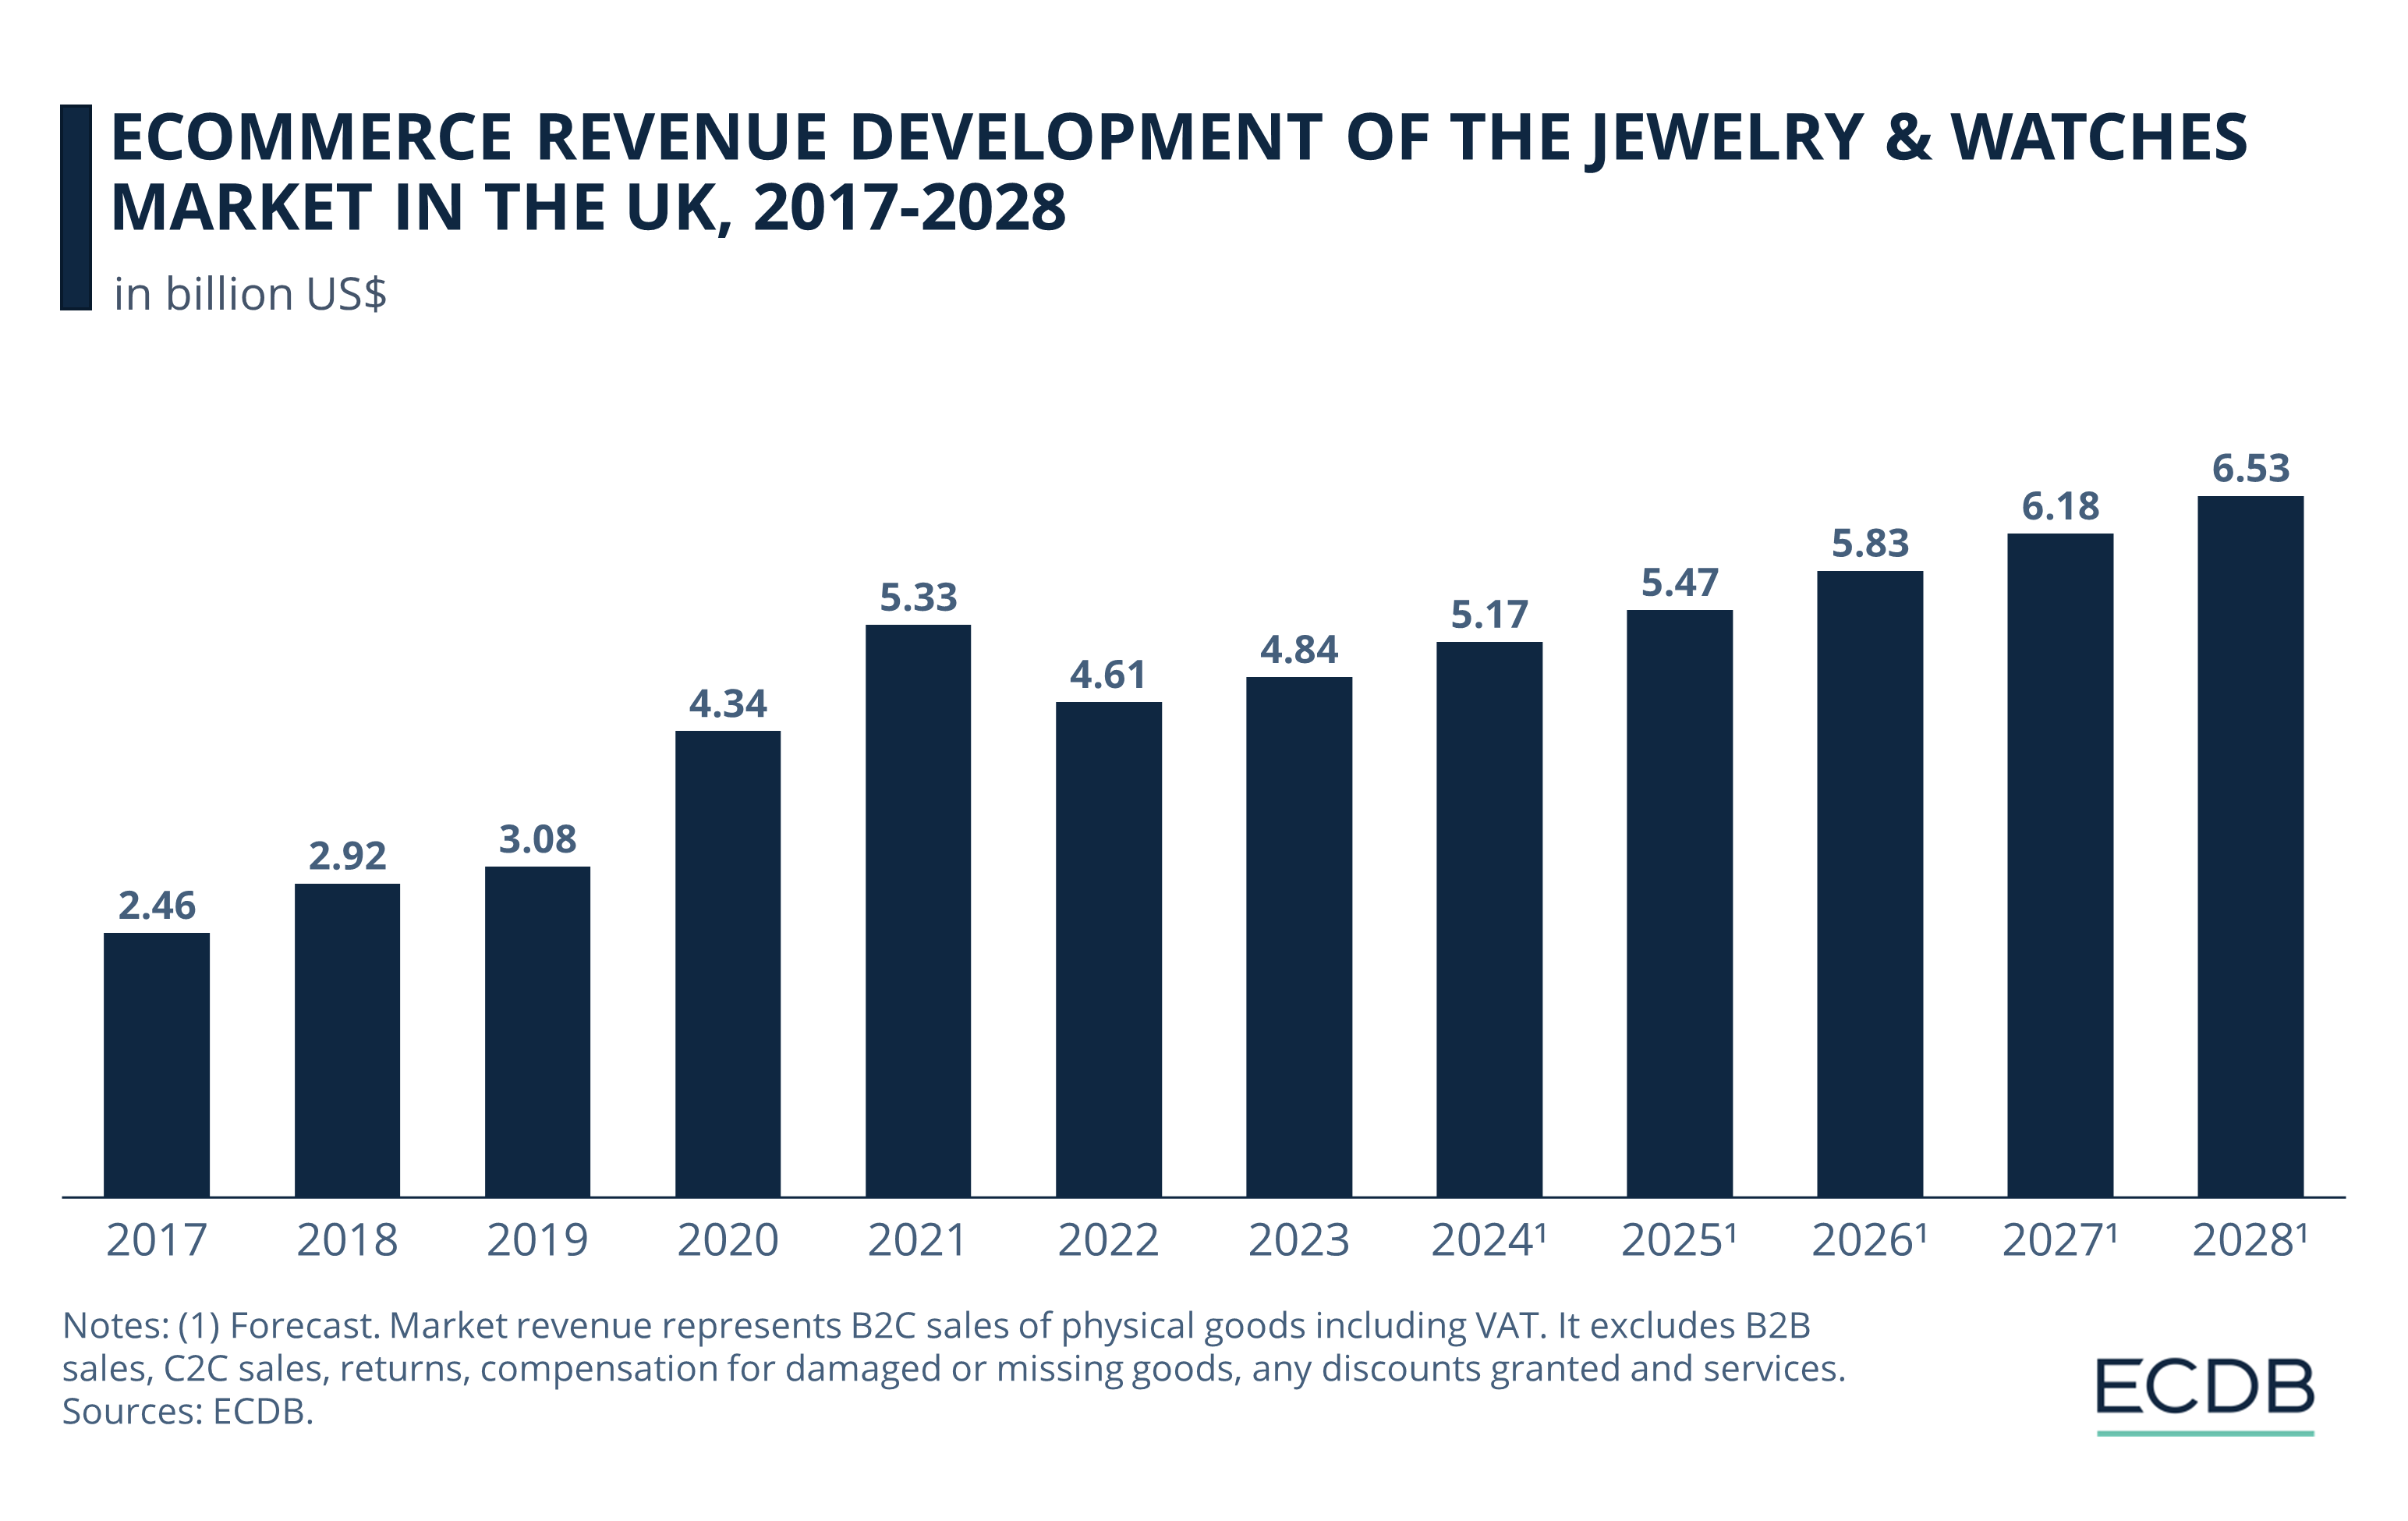 eCommerce Revenue Development of the Jewelry & Watches Market in the UK, 2017-2028